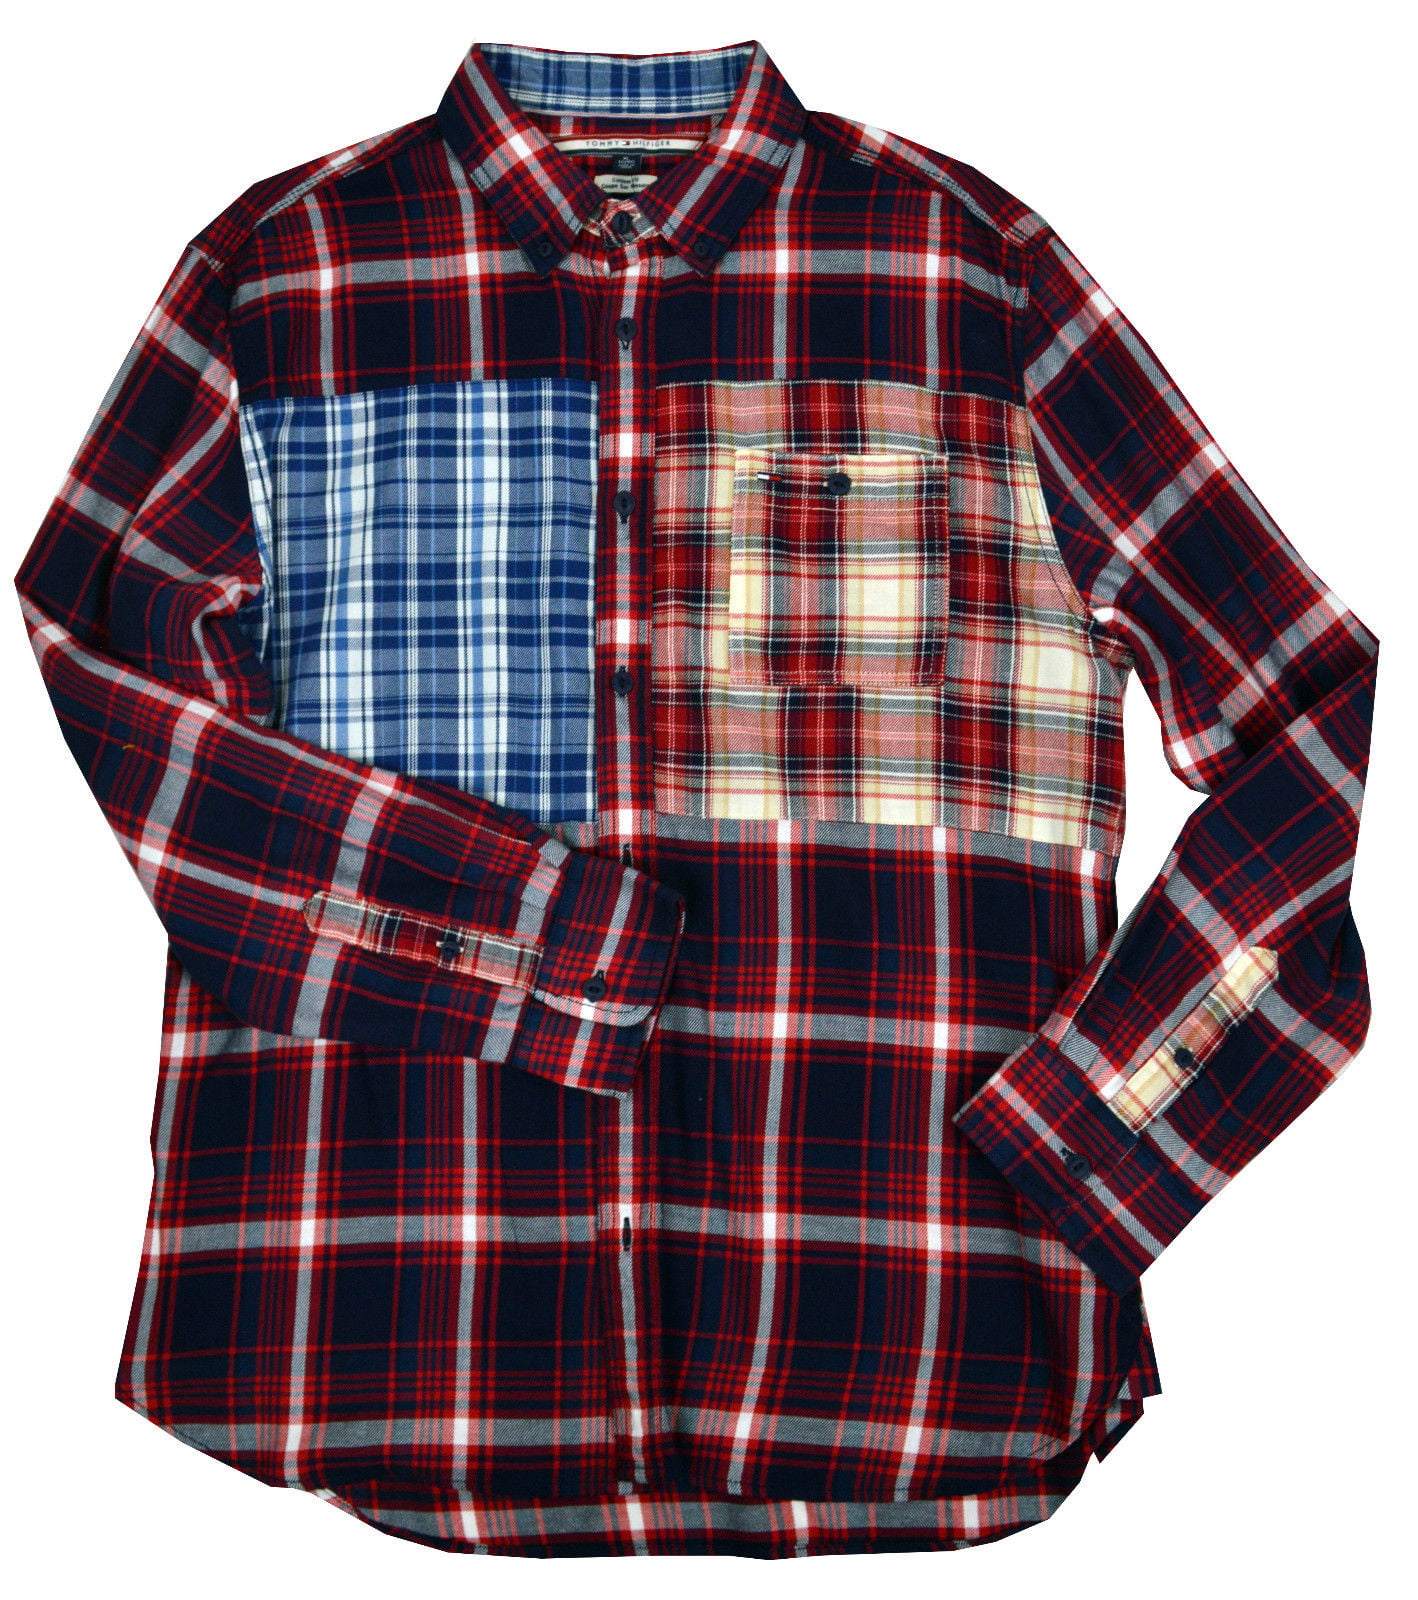 New Tommy Hilfiger Mens Mixed Plaid Flannel Print Shirt Navy Red Multi ...